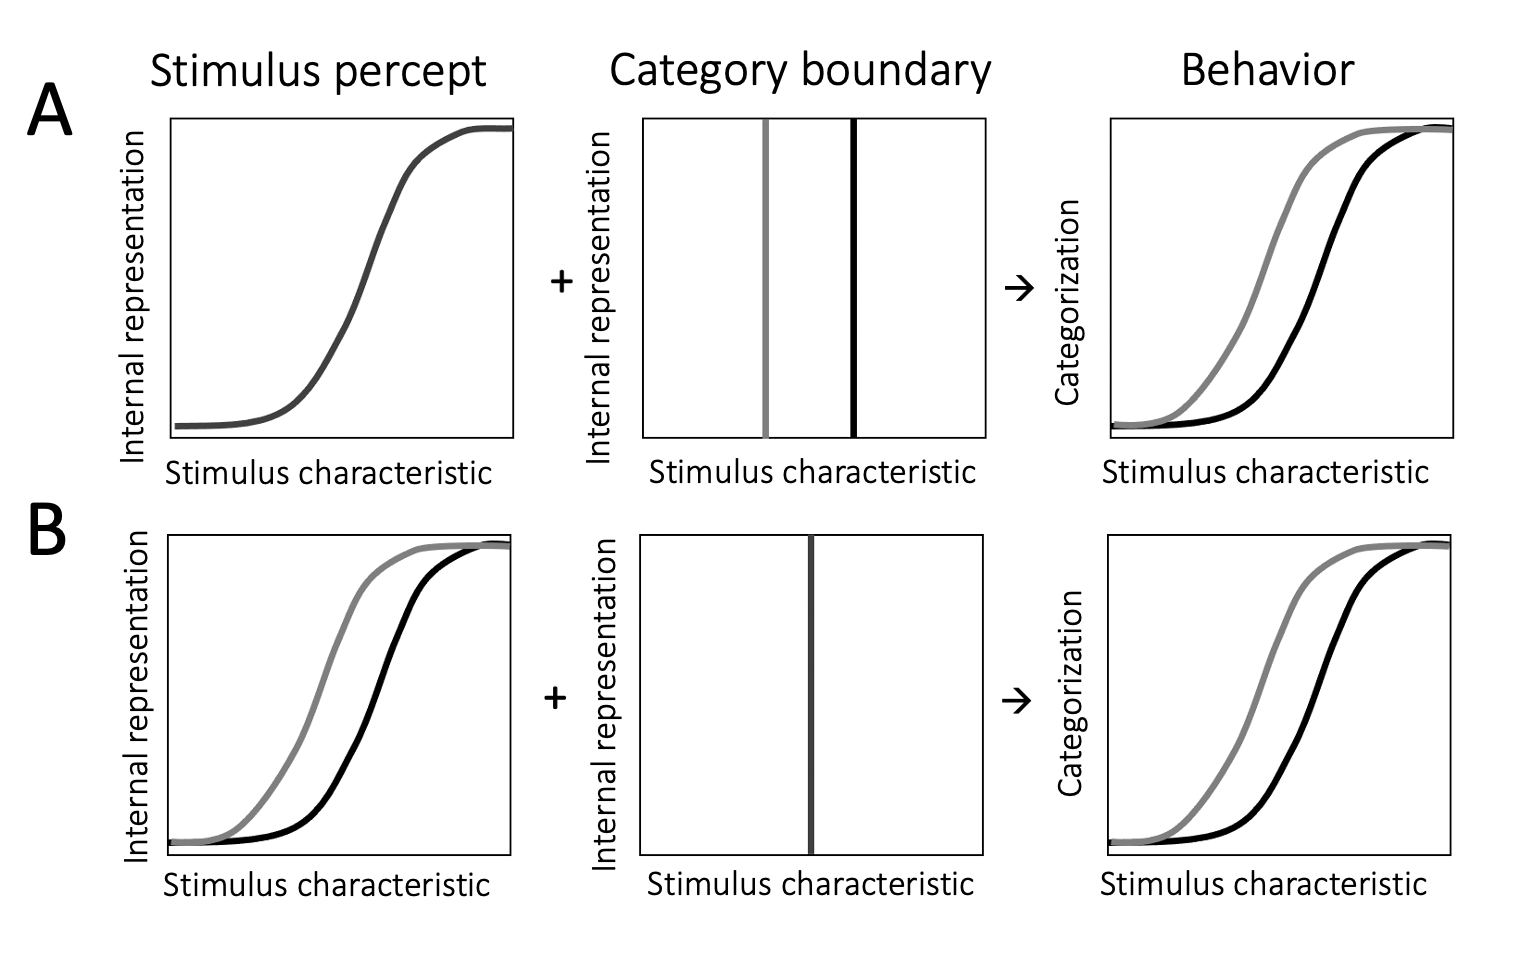 Possible sources of context dependence. $\textbf{A:}$ Participants' internal representation (left panel) of the stimulus is stable across contexts. Their representation of the category boundary (middle panel), however, changes such that it is lower in a context dominated by low stimulus property values (grey line) and higher in a context dominated by high stimulus property values (black line). This may be driven by a Bayesian process incorporating the prior distribution of stimulus characteristics in a noisy representation of the category boundary. It can lead to the observed context dependence in categorization decisions (right panel). $\textbf{B:}$ Participants' internal representation of stimulus property space shifts across contexts (left panel). This change may be driven by neural adaptation to contextual levels of stimulation. Participants' representation of the category boundary, however, remains stable (middle panel). This can also lead to the observed context dependence in categorization decisions (right panel). Note that both of these two processes can occur at the same time and influence categorizations together.